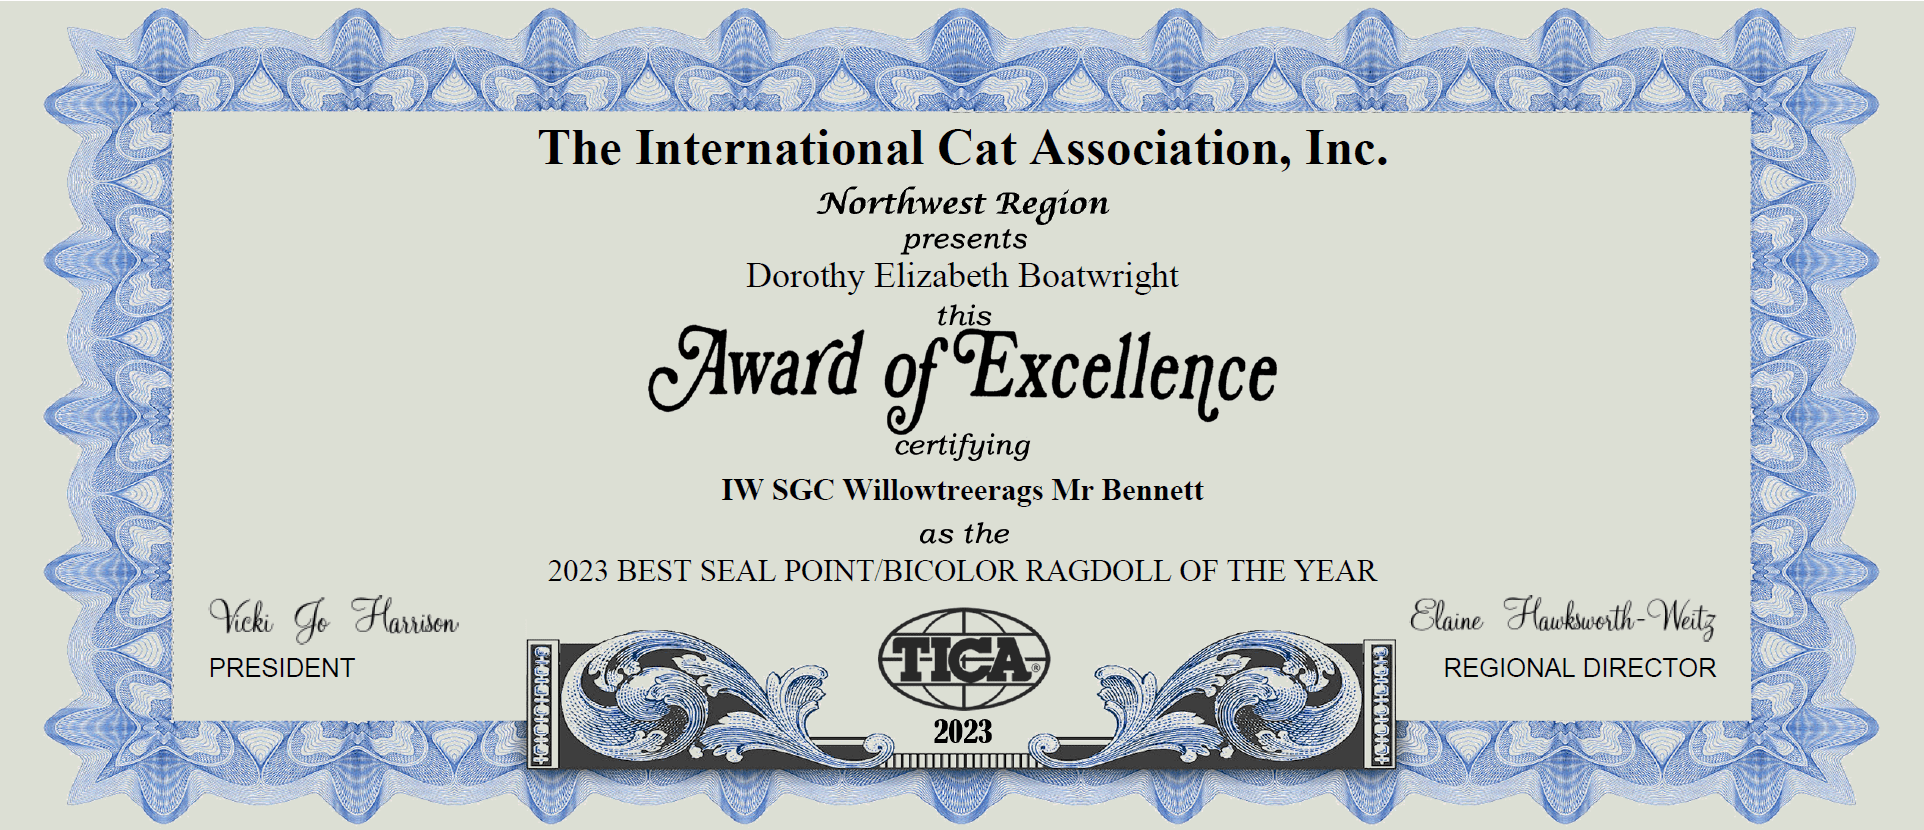 AWARD OF EXCELLENCE WILLOWTREERAGS MR BENNETT 2023 BEST SEAL POINT BICOLOR RAGDOLL OF THE YEAR